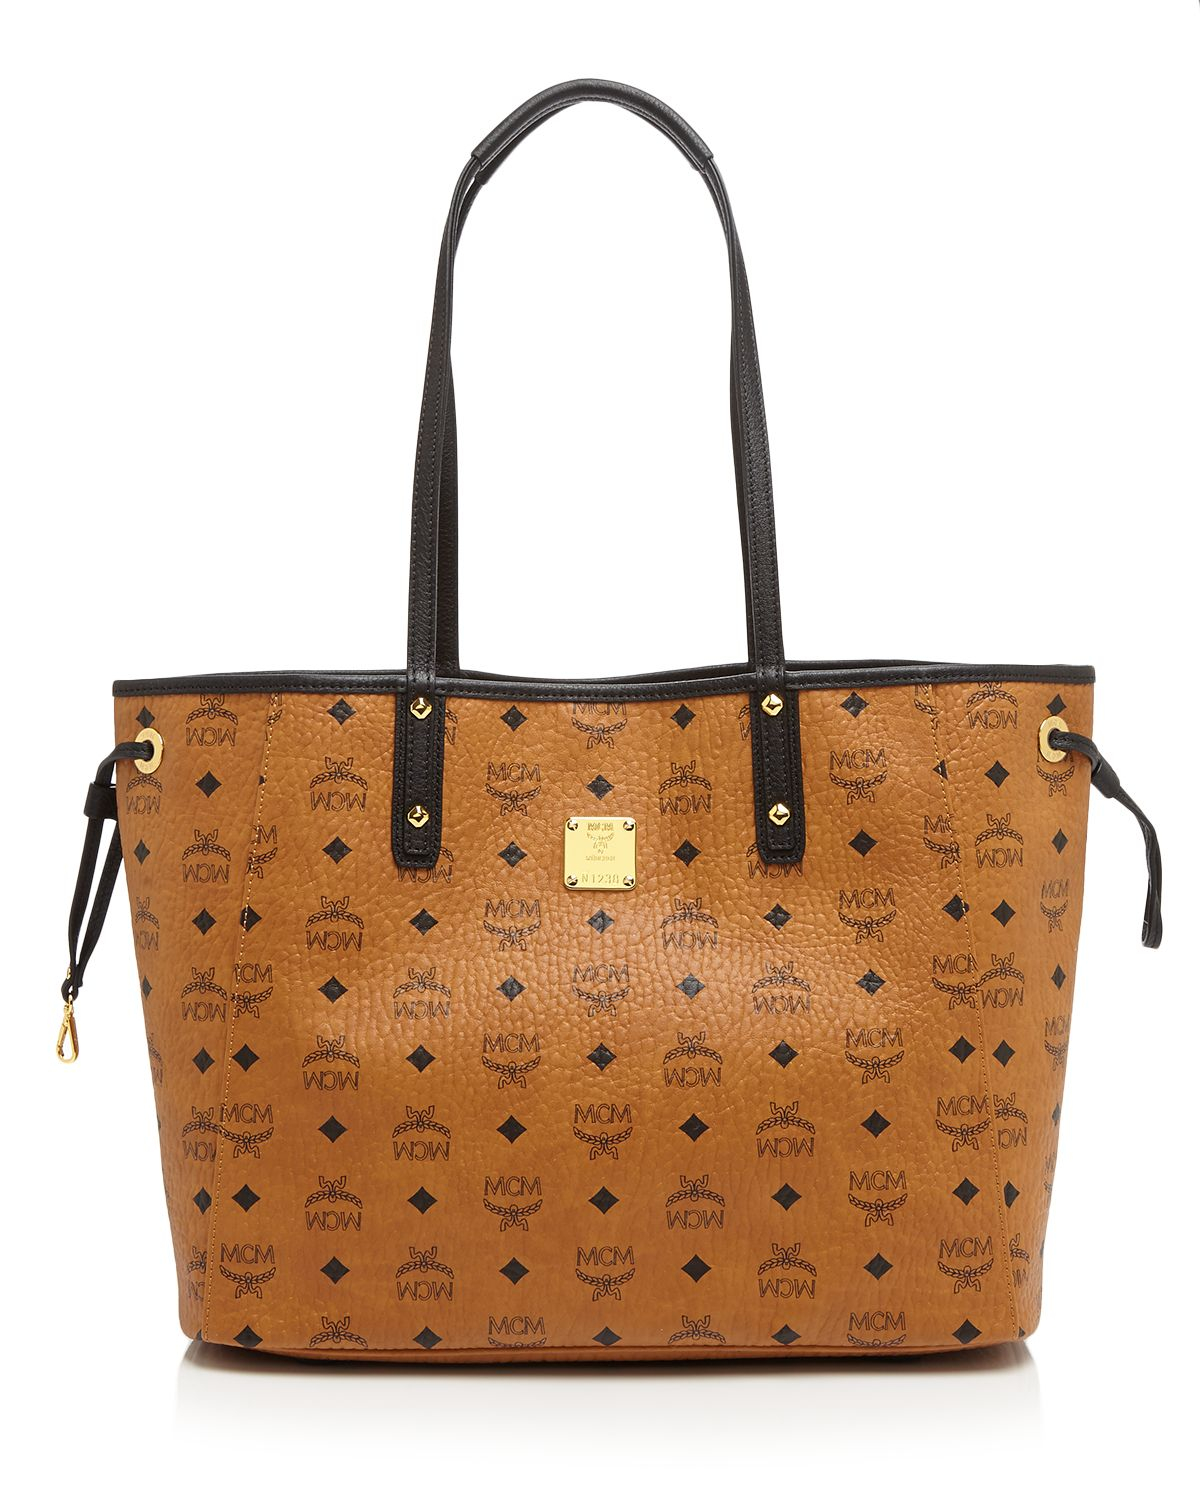 Lyst - Mcm Tote - Shopper Project Visetos Reversible in Brown